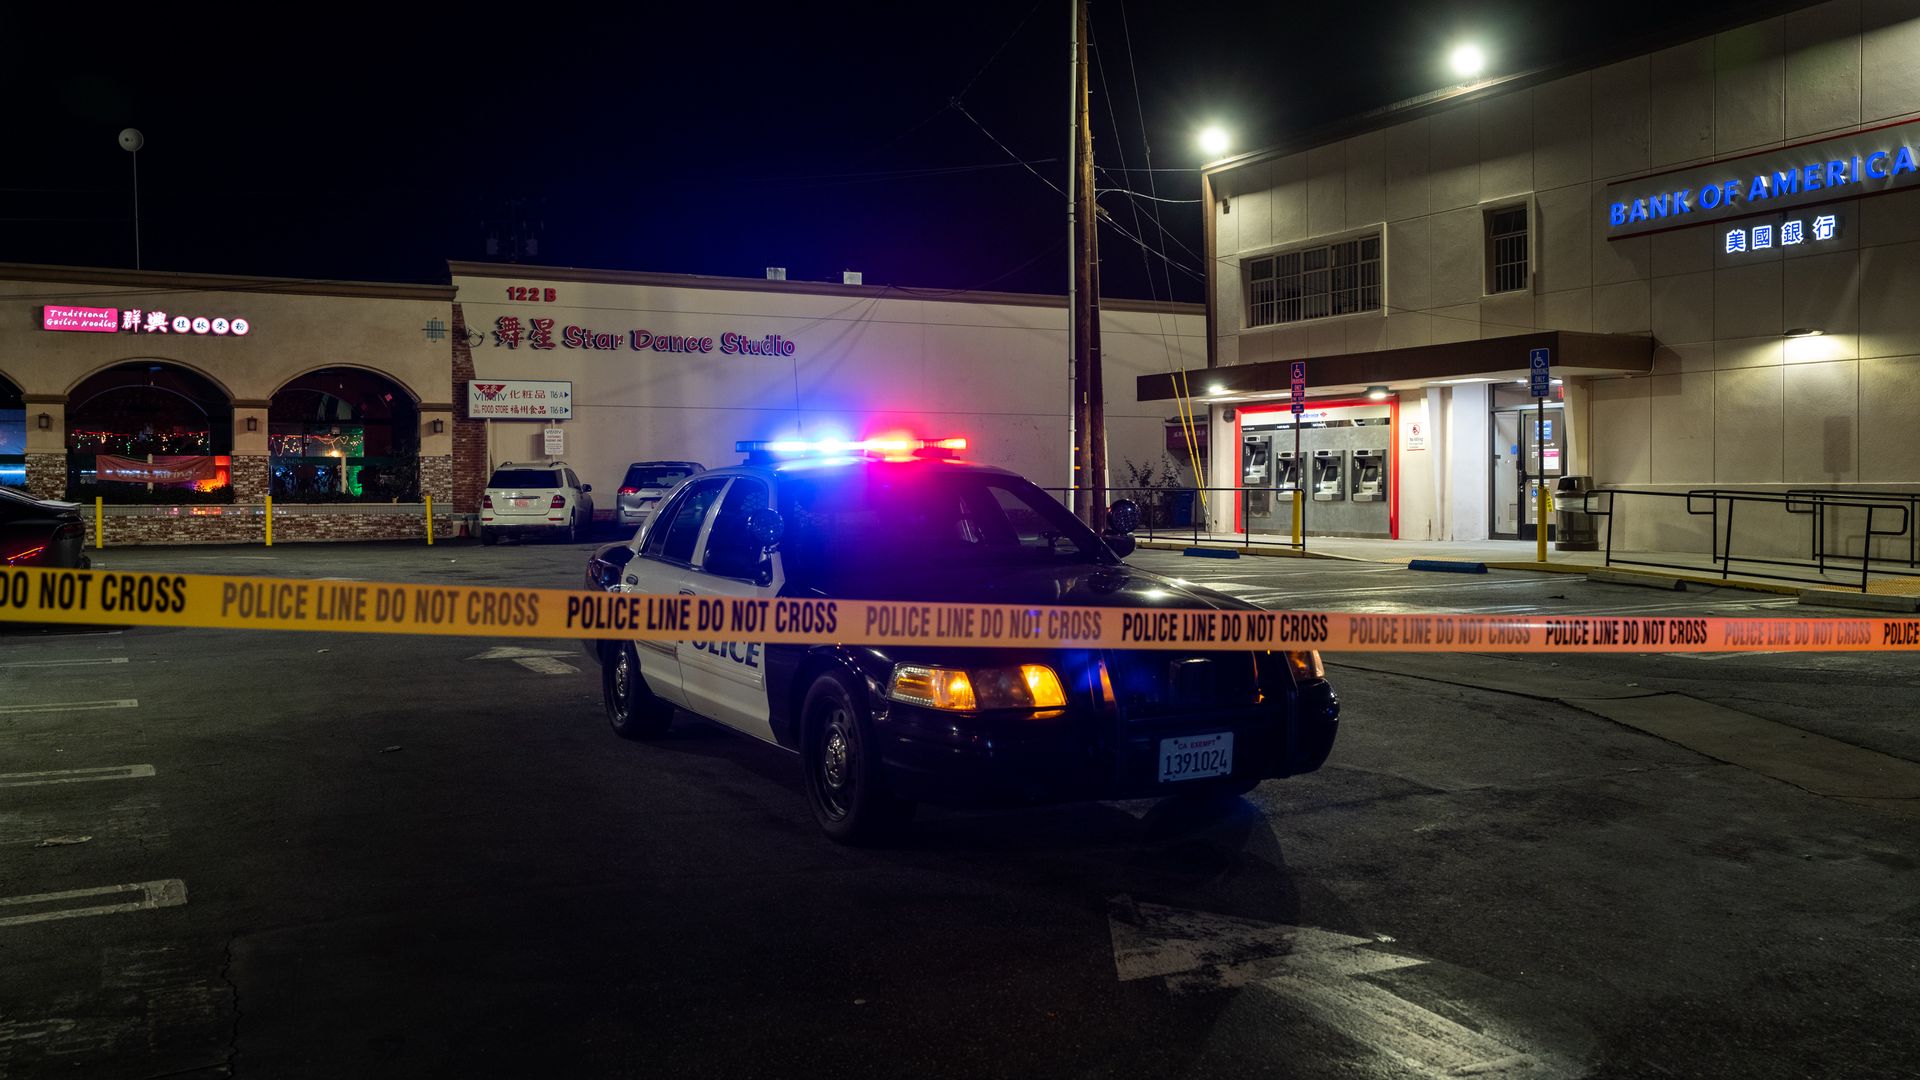 Police tape is seen near the scene of a deadly shooting on January 22, 2023 in Monterey Park, California